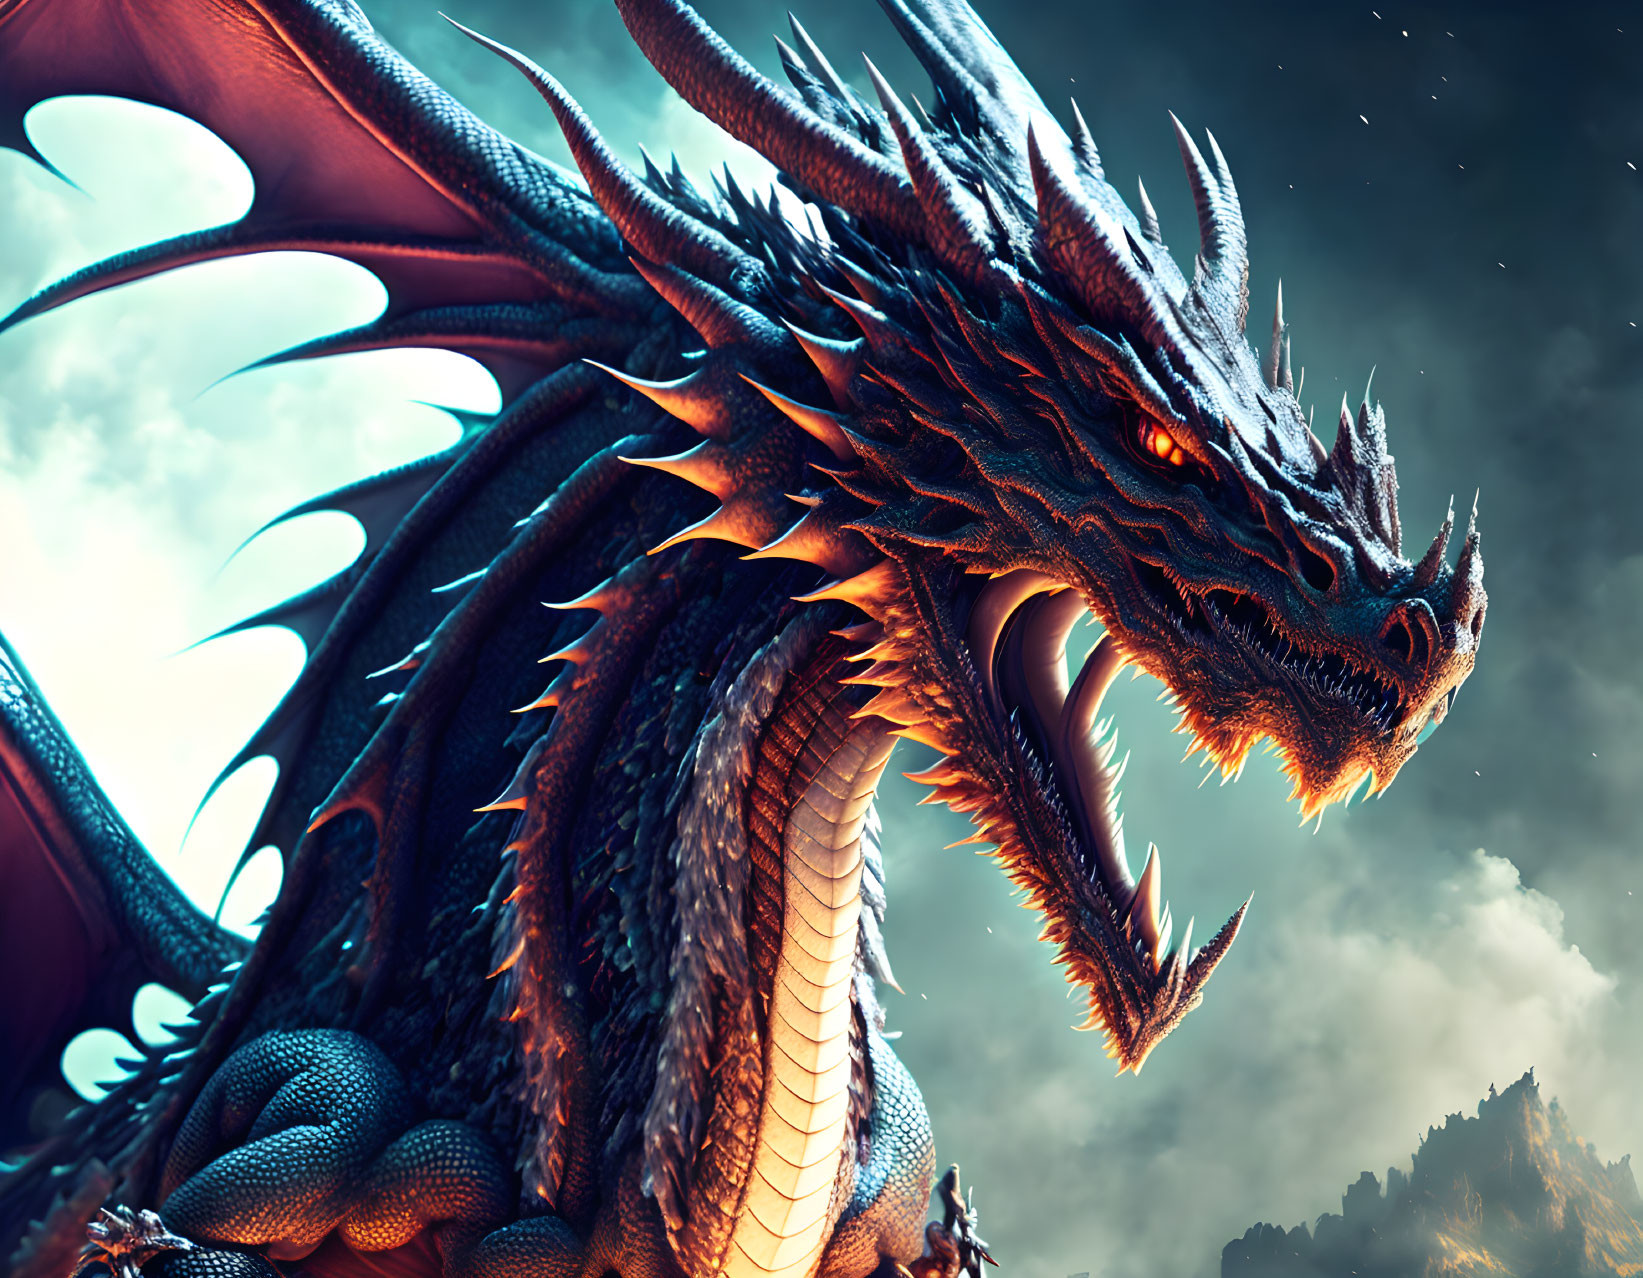 Majestic dragon with sharp scales and horns under dramatic sky